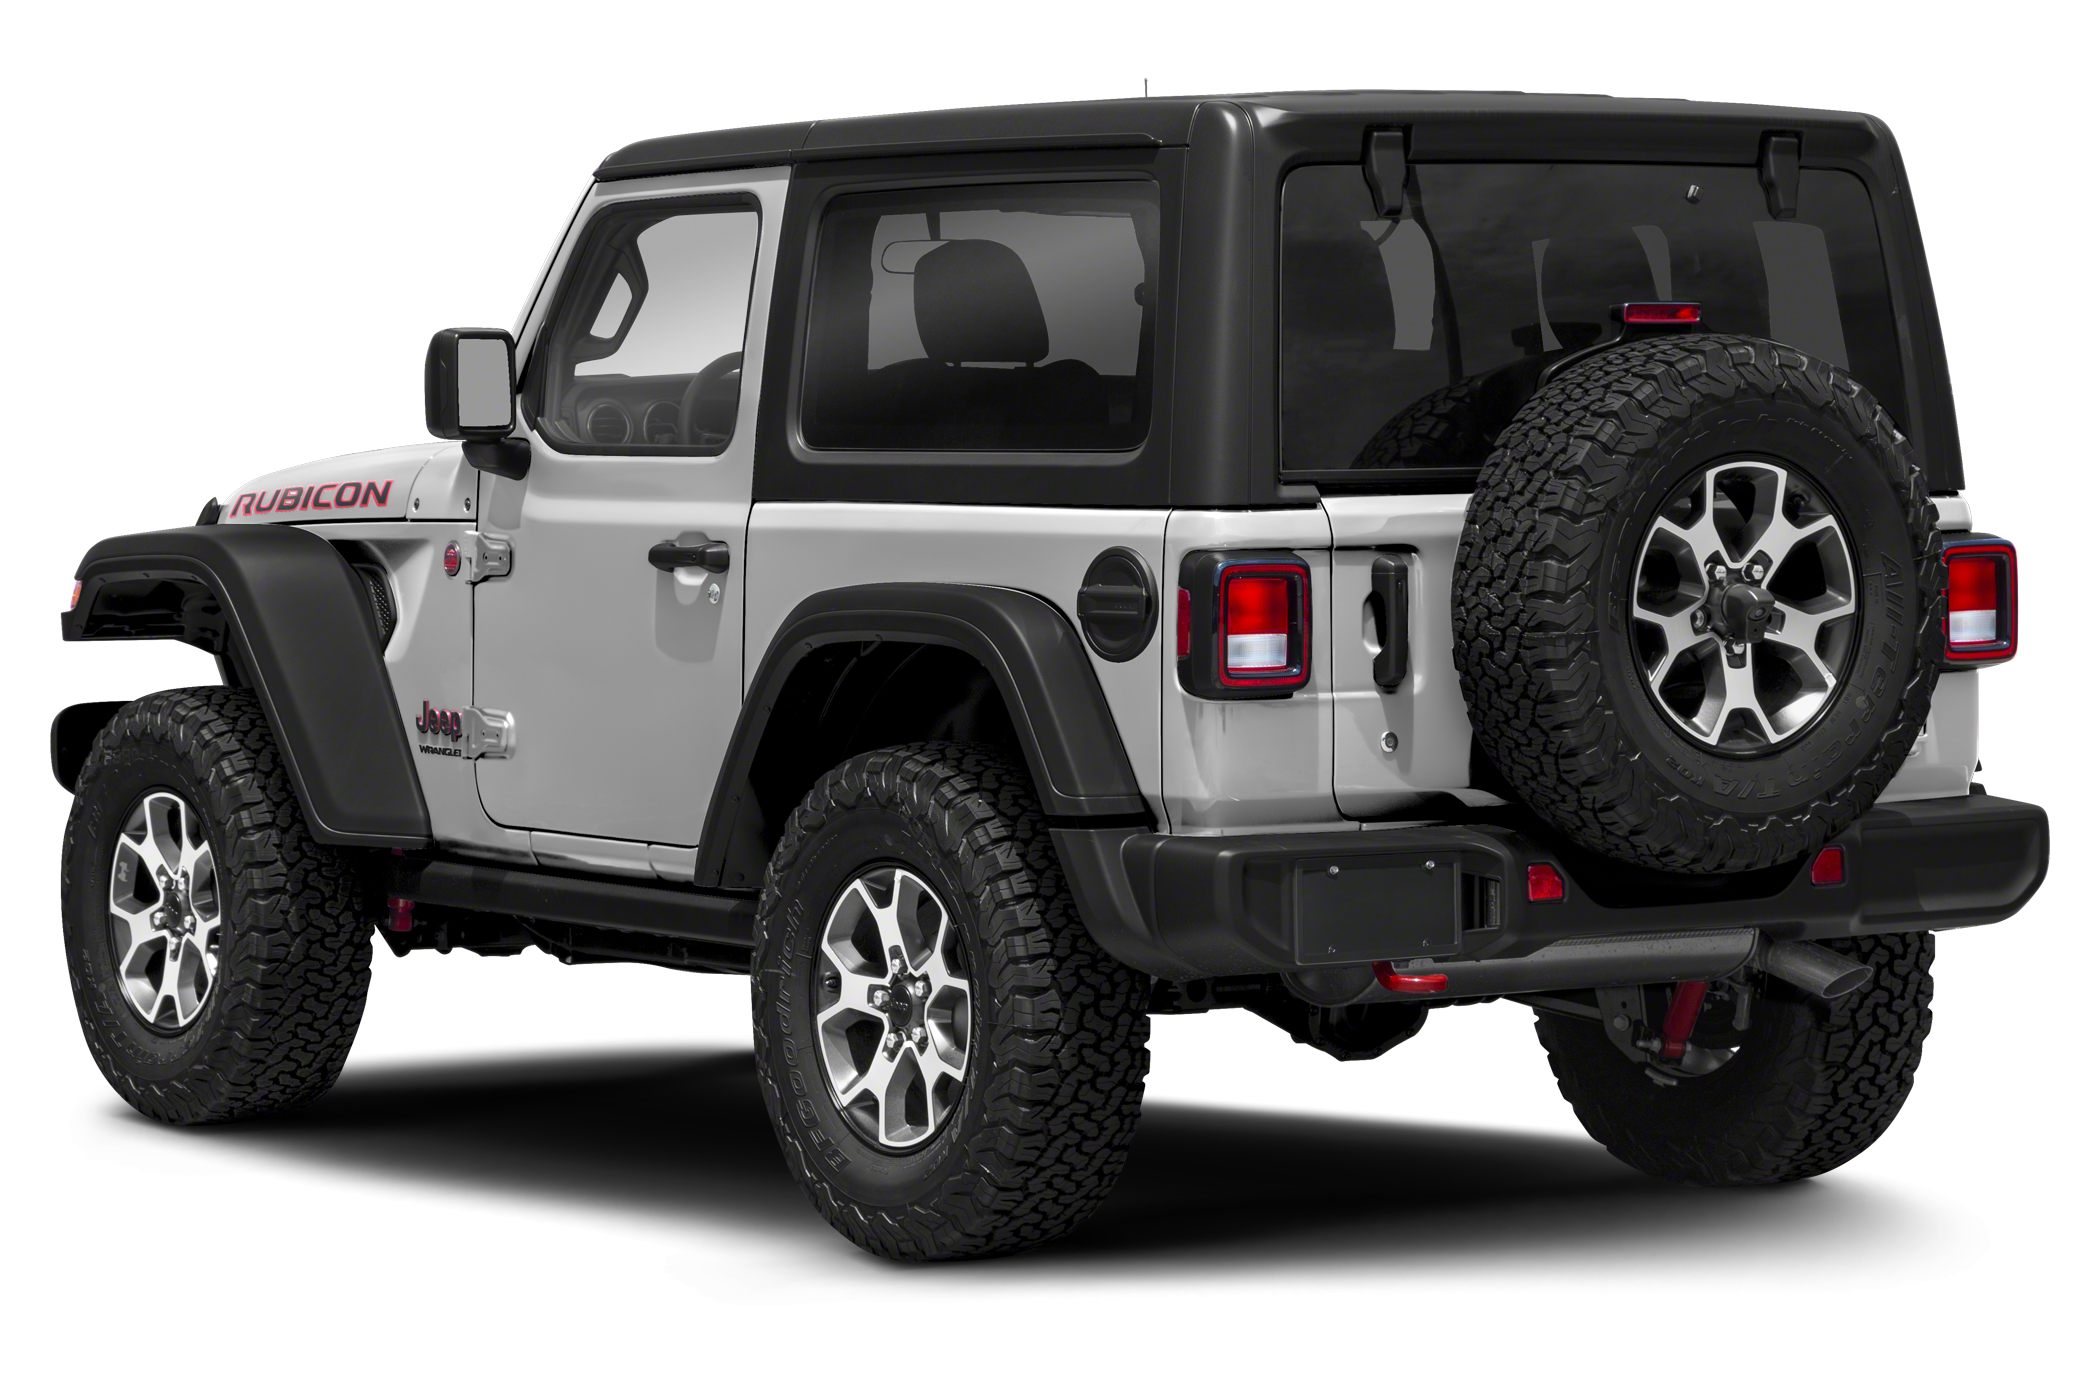 21 Jeep Wrangler Rubicon 2dr 4x4 Pricing And Options